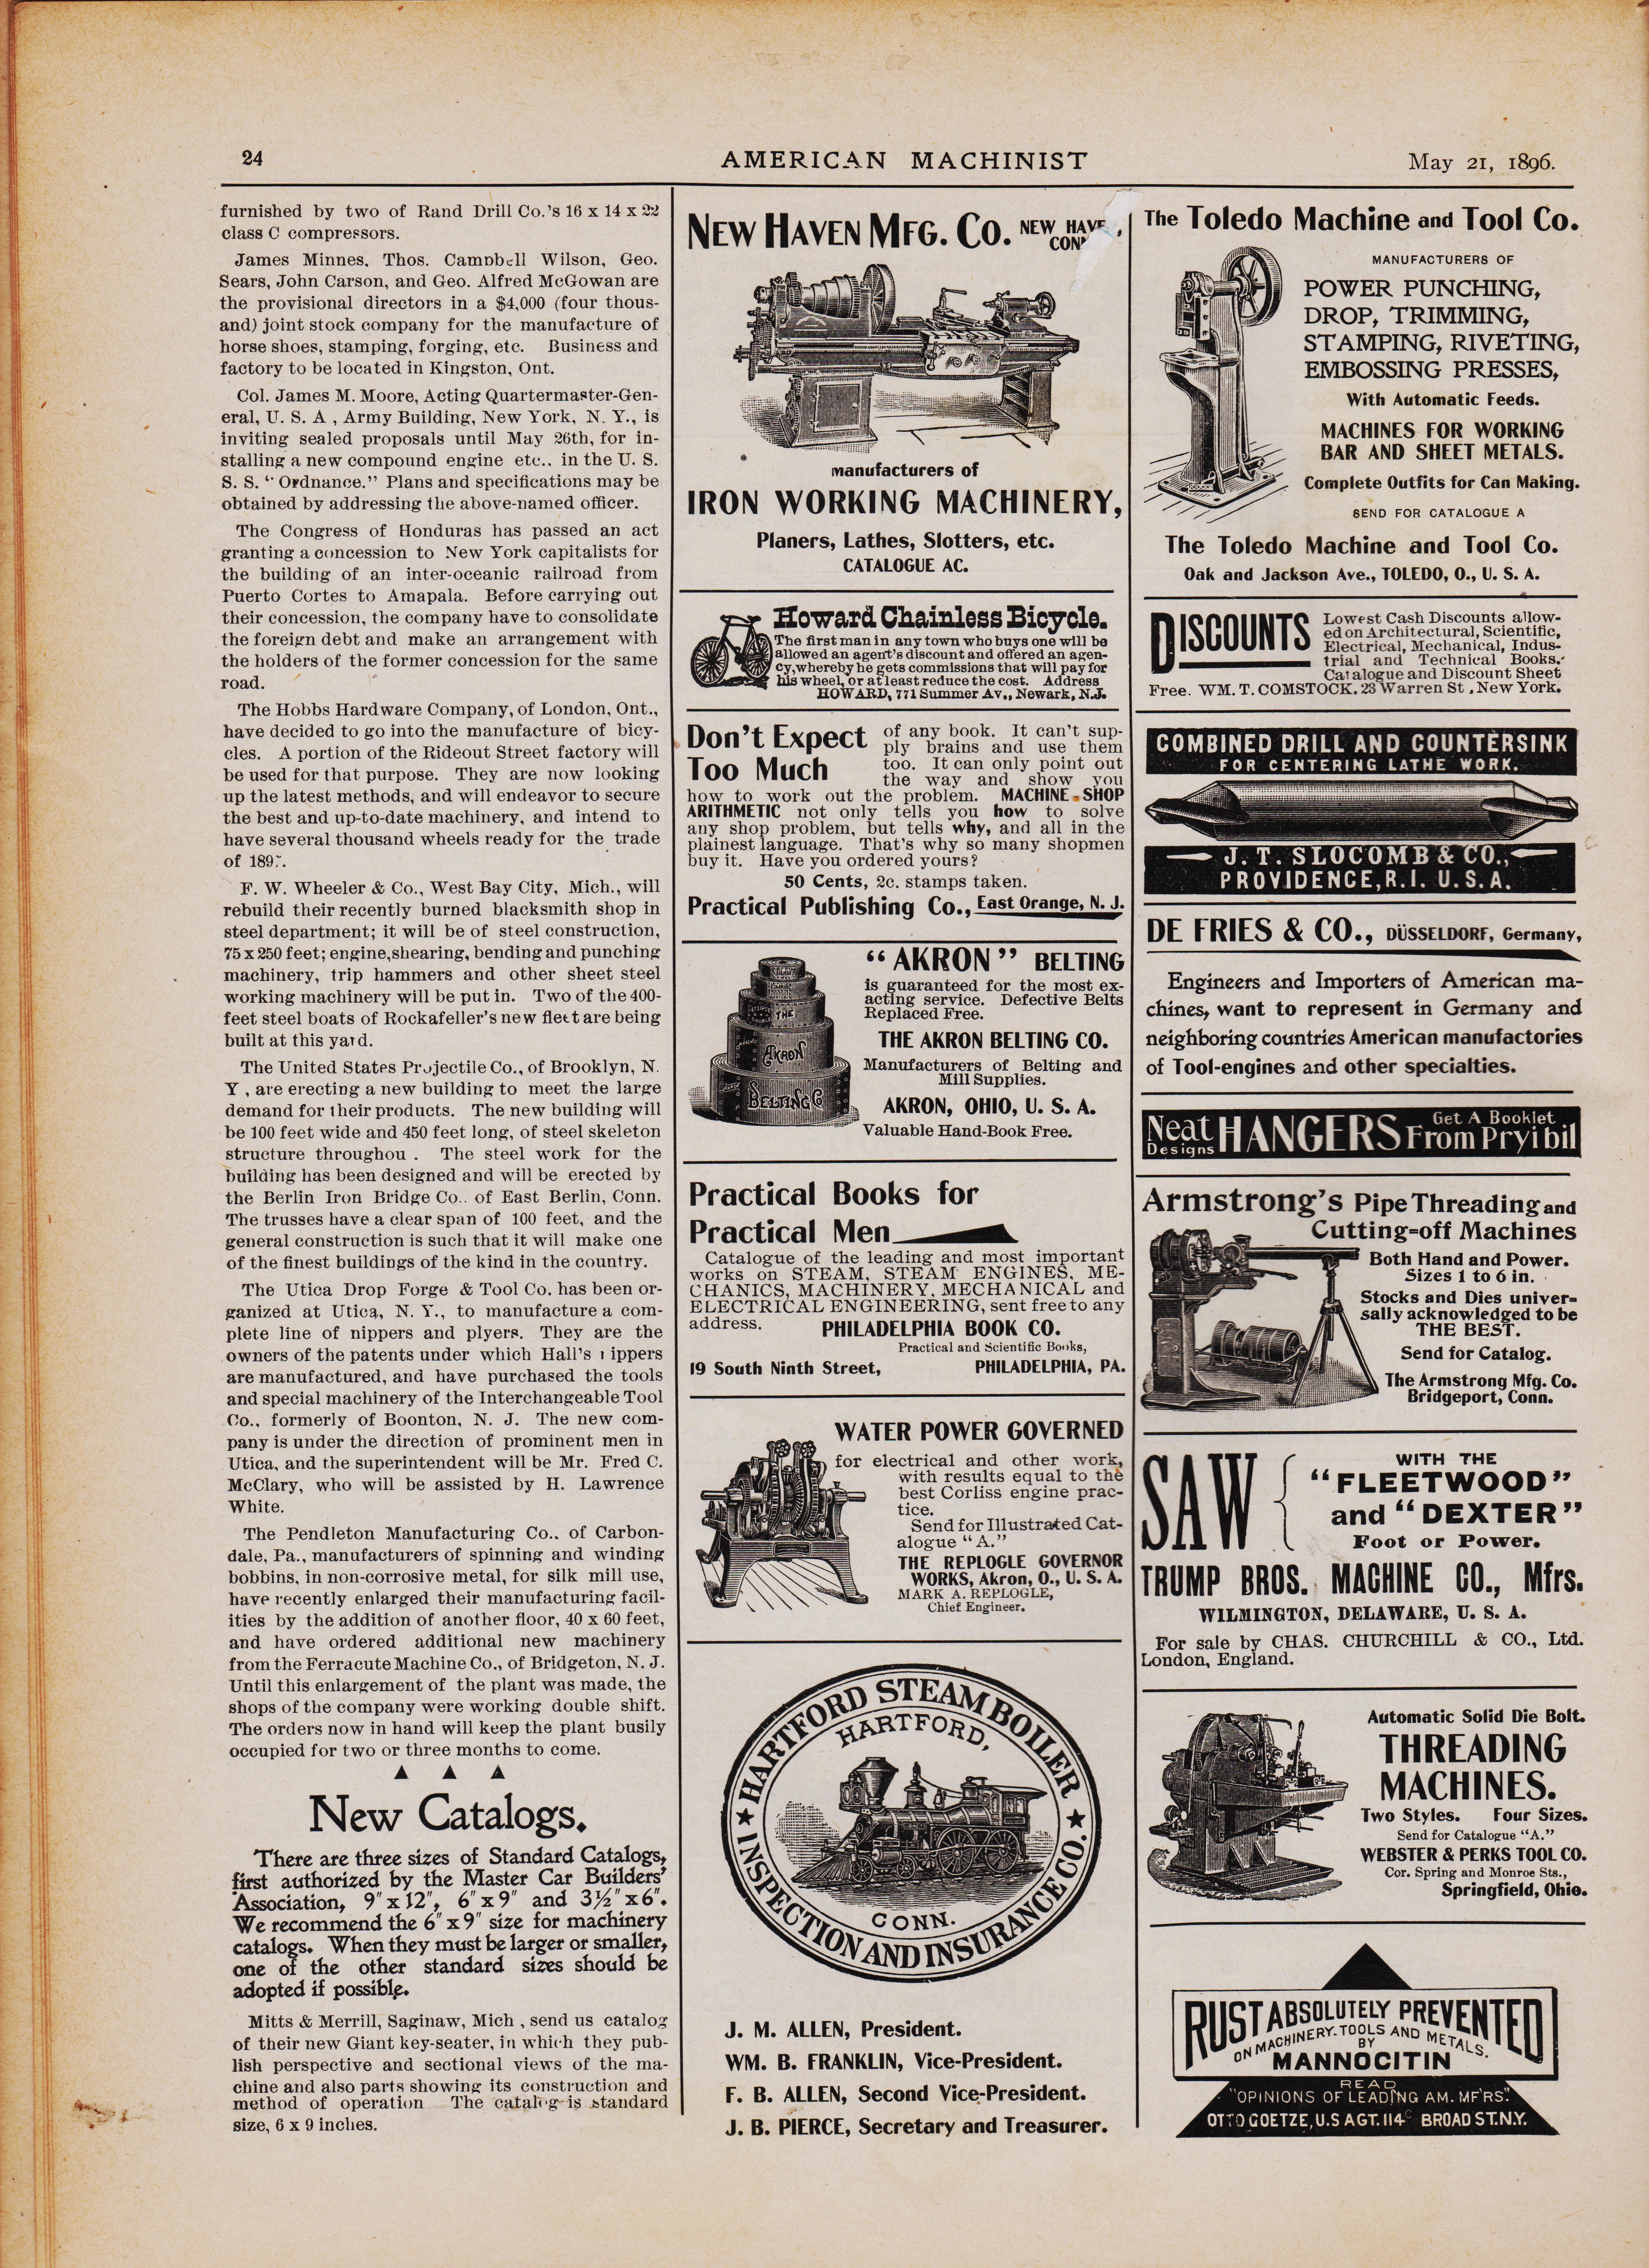 https://antiquemachinery.com/images-1896/American-Machinist-Feb-12-1887-May-1-pg-24-New-Haven-Mfg-co-Lathe-Iron-working-machinery-Toledo-Machine-and-tool-Co-Press-sheet-metal-press-Armstrong-pipe-Threader-cutting-off-machine.jpeg